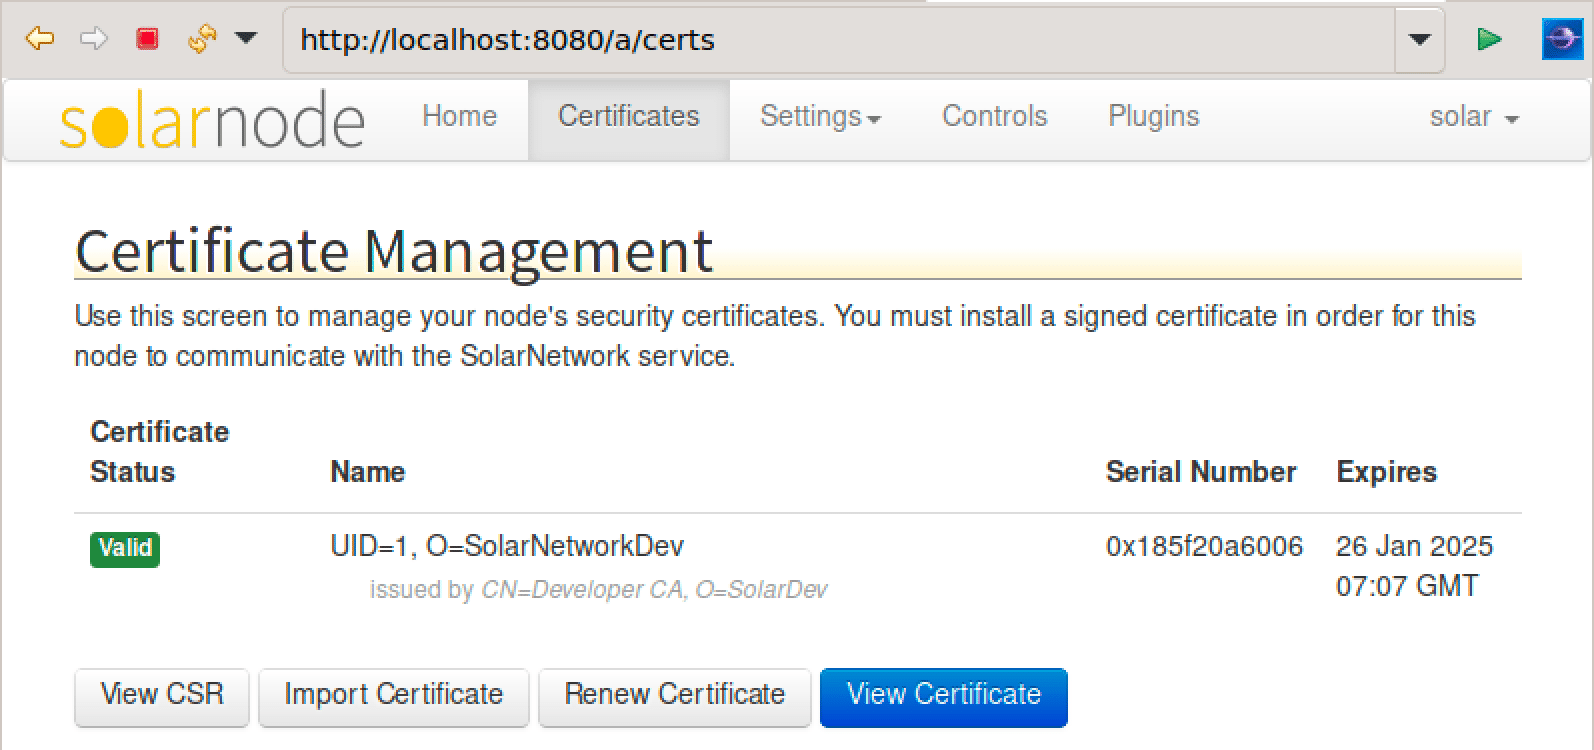 Screen shot of the SolarNode certificate